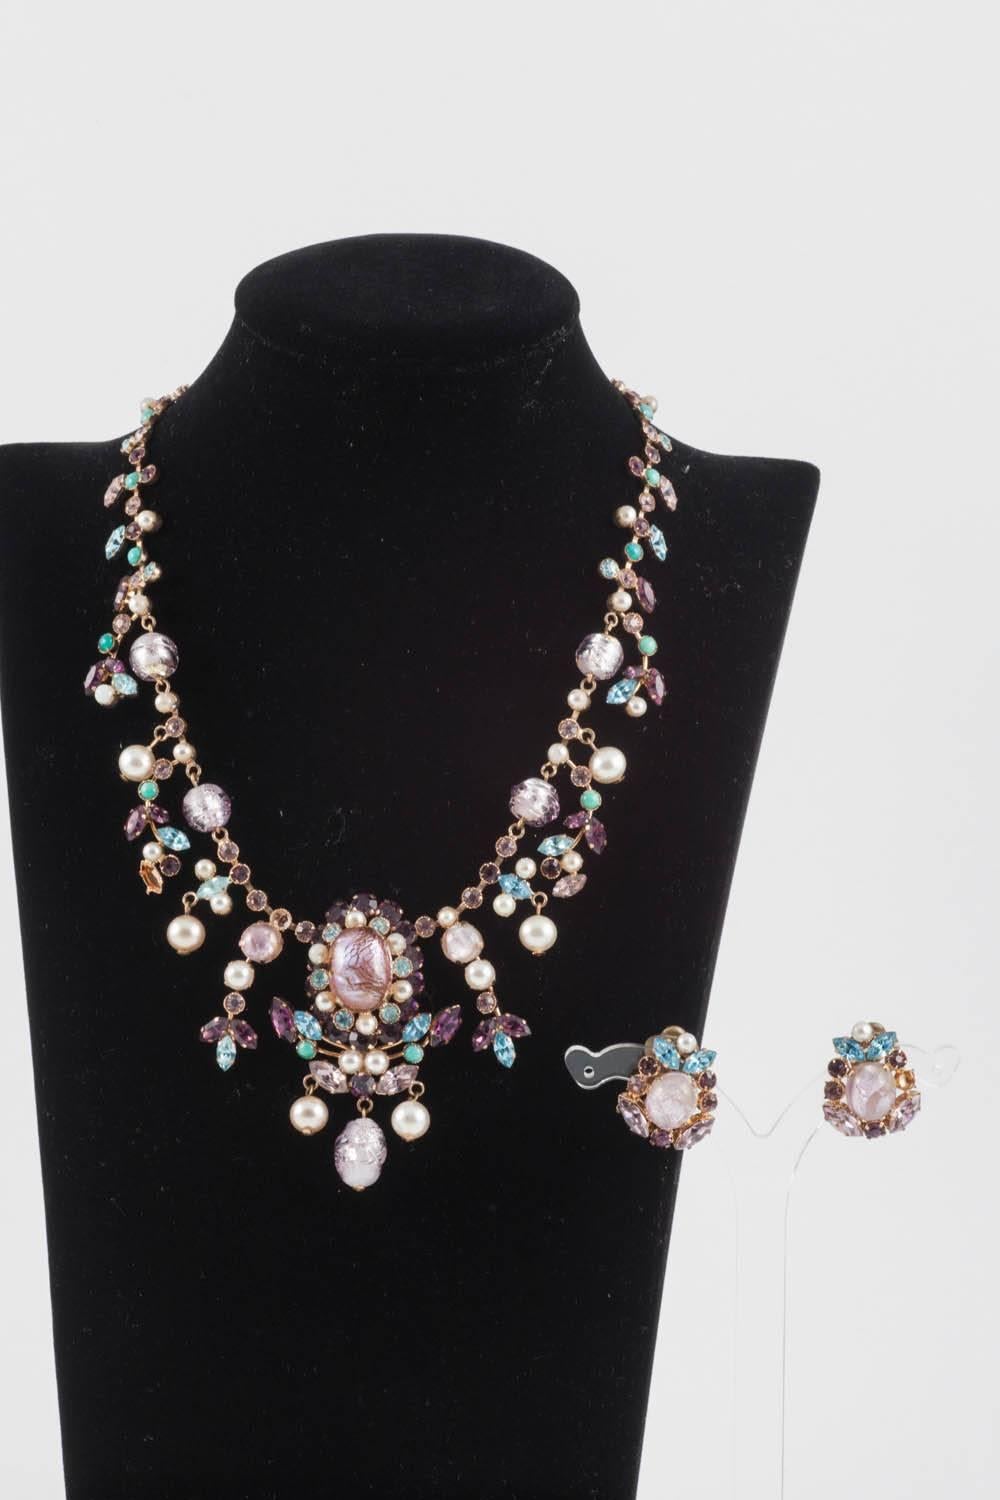 An exceptionally charming and sophisticated colour combination makes this rare set by the French parurier, Maryse Blanchard, very wearable and eye catching. Made from Venetian glass beads, coloured  pastes and pearls, some pendant and moving, this